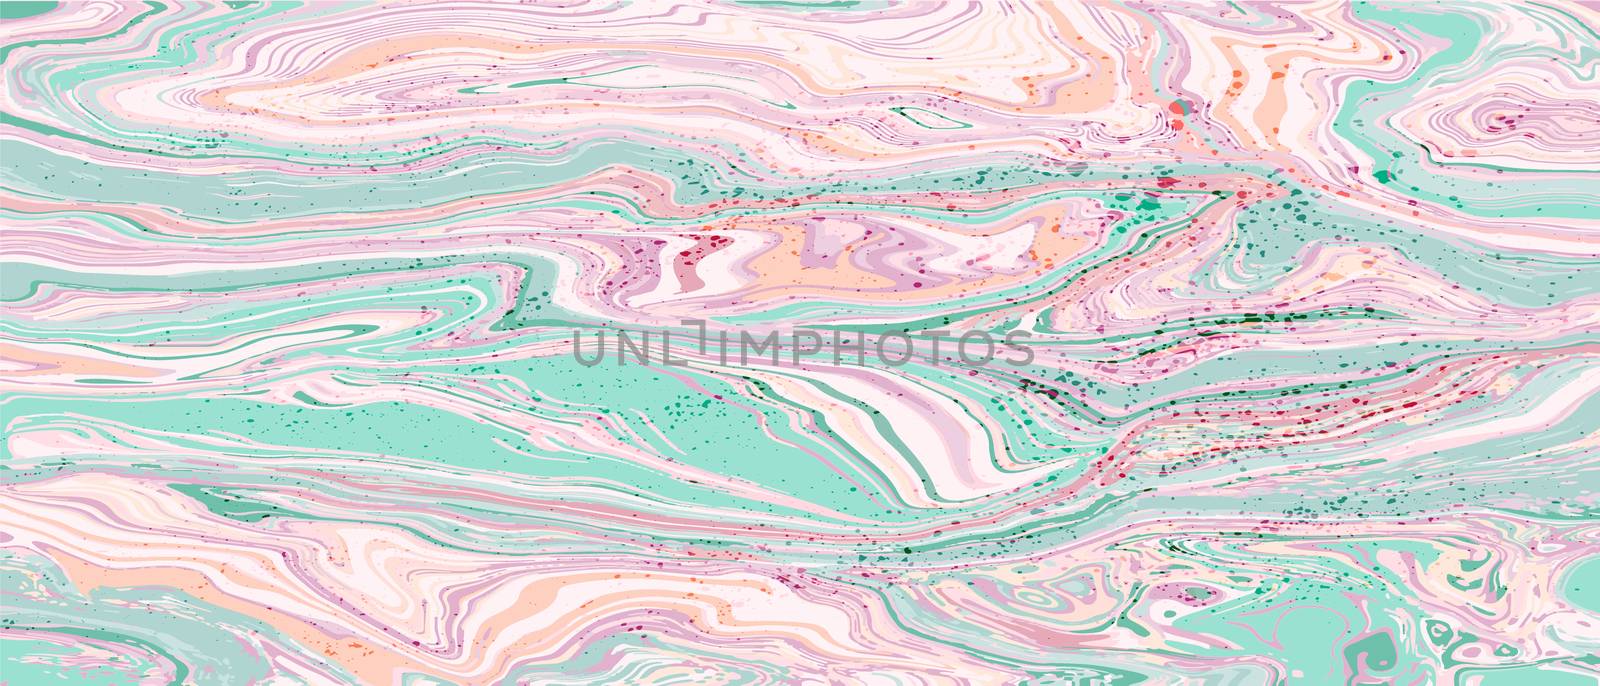 Pink and turquoise swirls of agate. Liquid swirls of marble texture. Fluid modern artwork. For wallpapers, banners, posters, cards, invitations, design covers, presentation. Vector illustration.